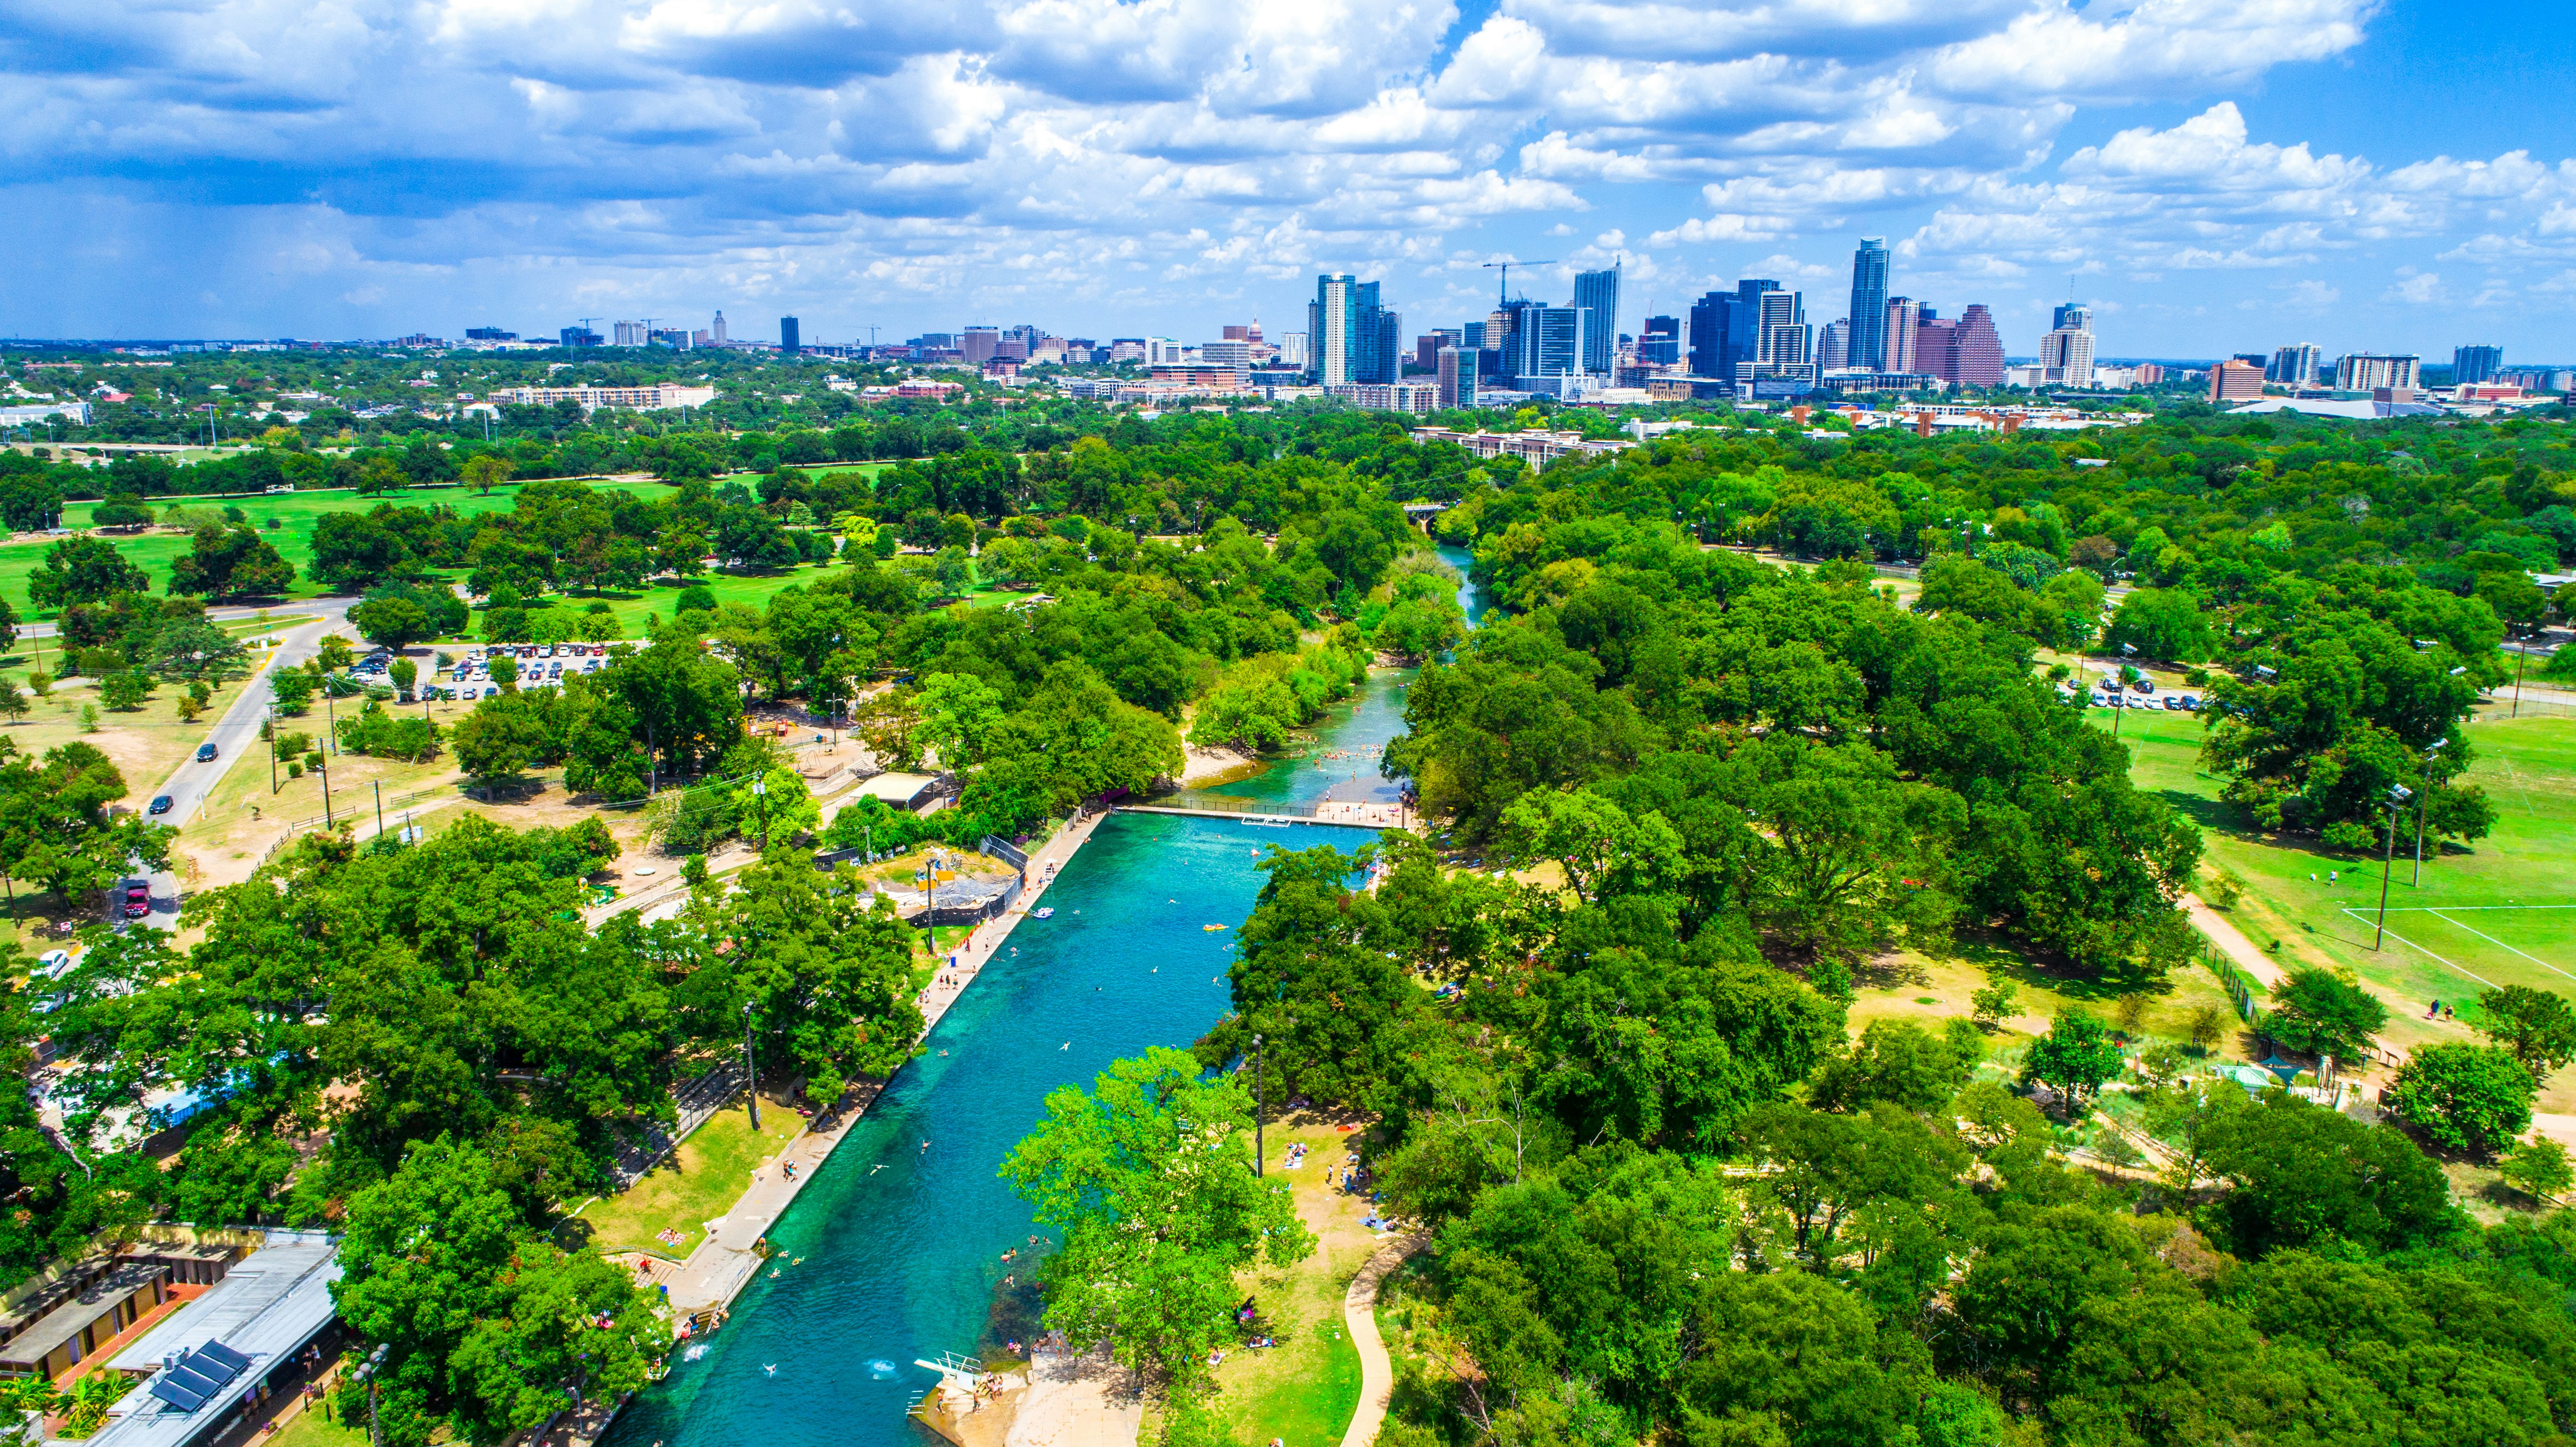 Aerial view of the Barton Springs pool, which is surrounded by tall green trees. In the distance, you can see the Austin skyline; Austin vs. Norman